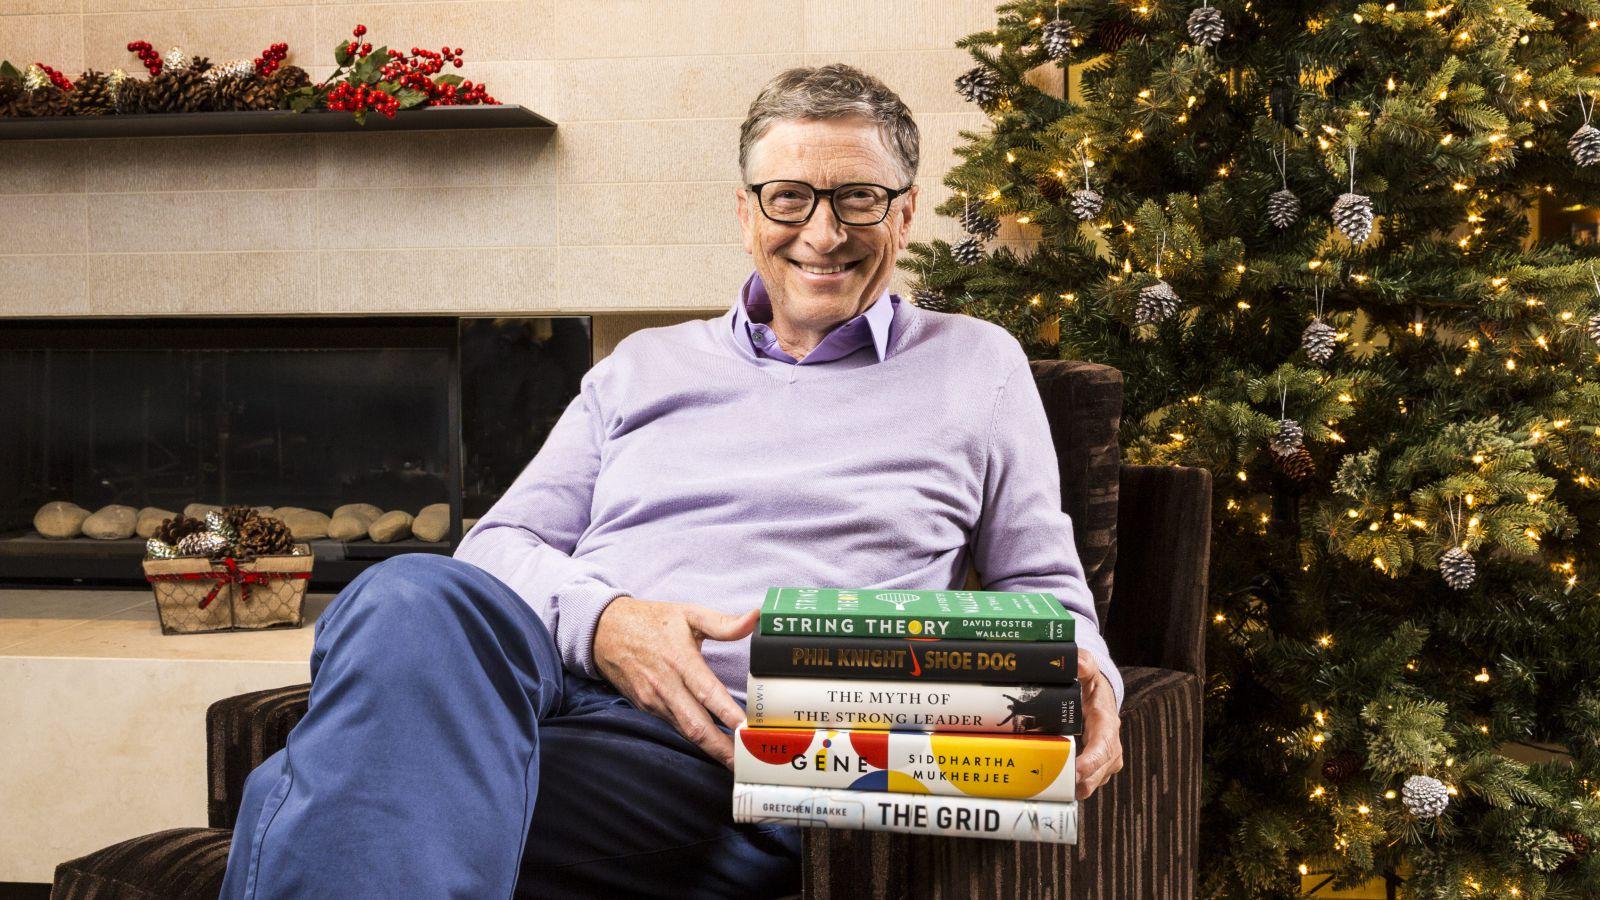 The billionaire has picked a handful of books that look at current economic, scientific and political questions